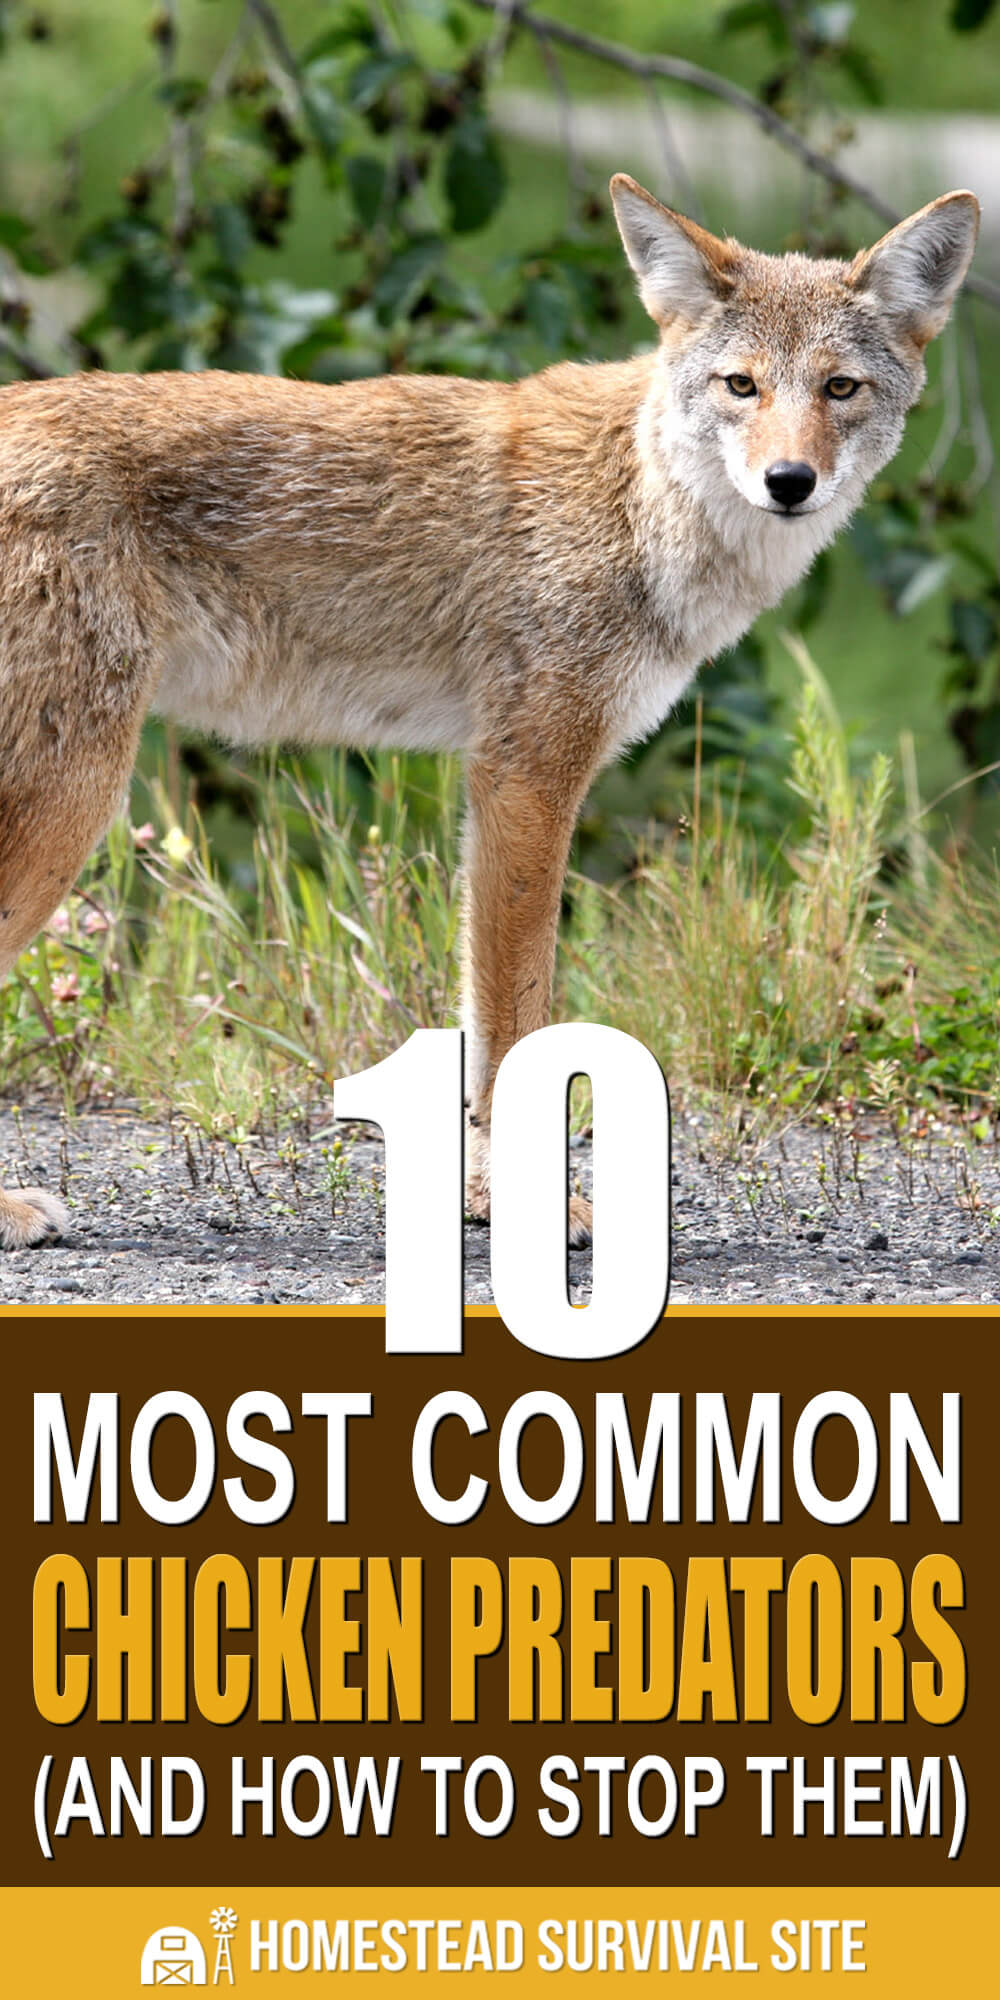 10 Most Common Chicken Predators (And How to Stop Them)